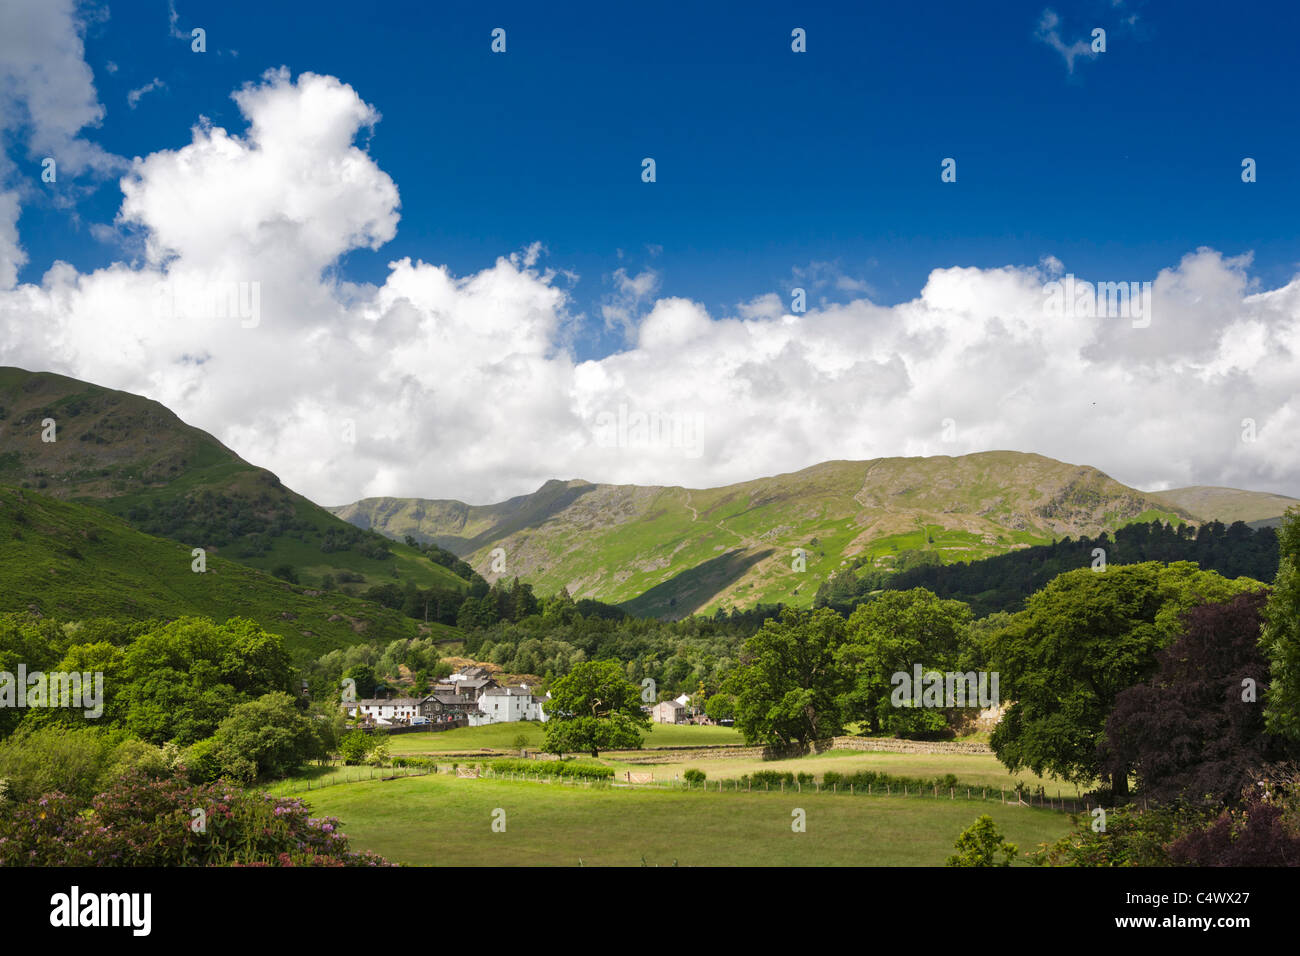 View of Patterdale, Cumbria, in the English Lake District, looking up the Gisedale valley towards Helvellyn Stock Photo